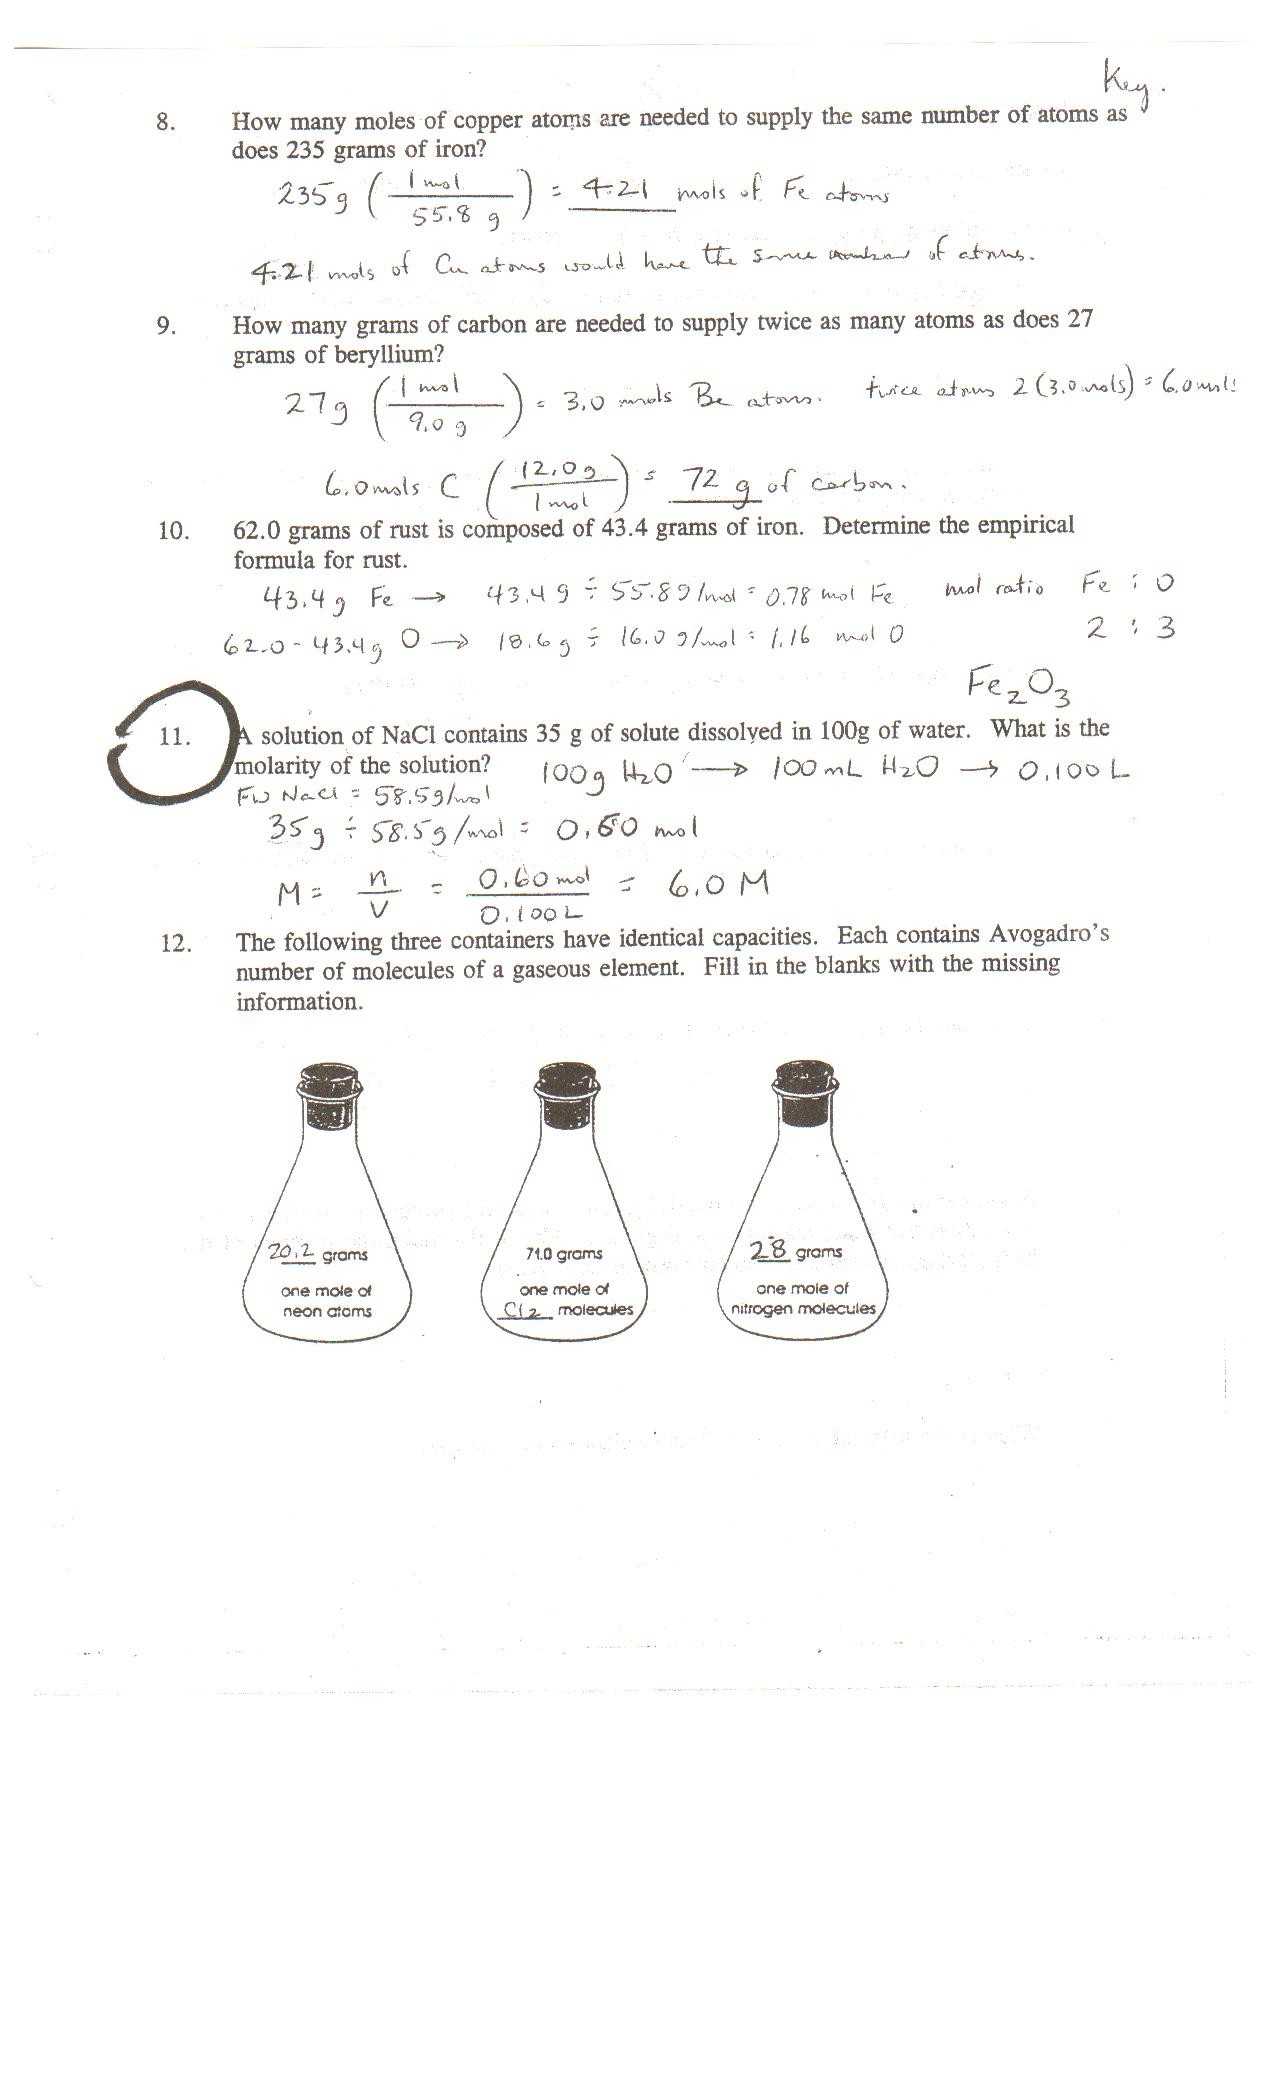 Ionic Bonding Practice Worksheet Answers as Well as Overview Chemical Bonds Worksheet Answers Luxury Covalent Bond